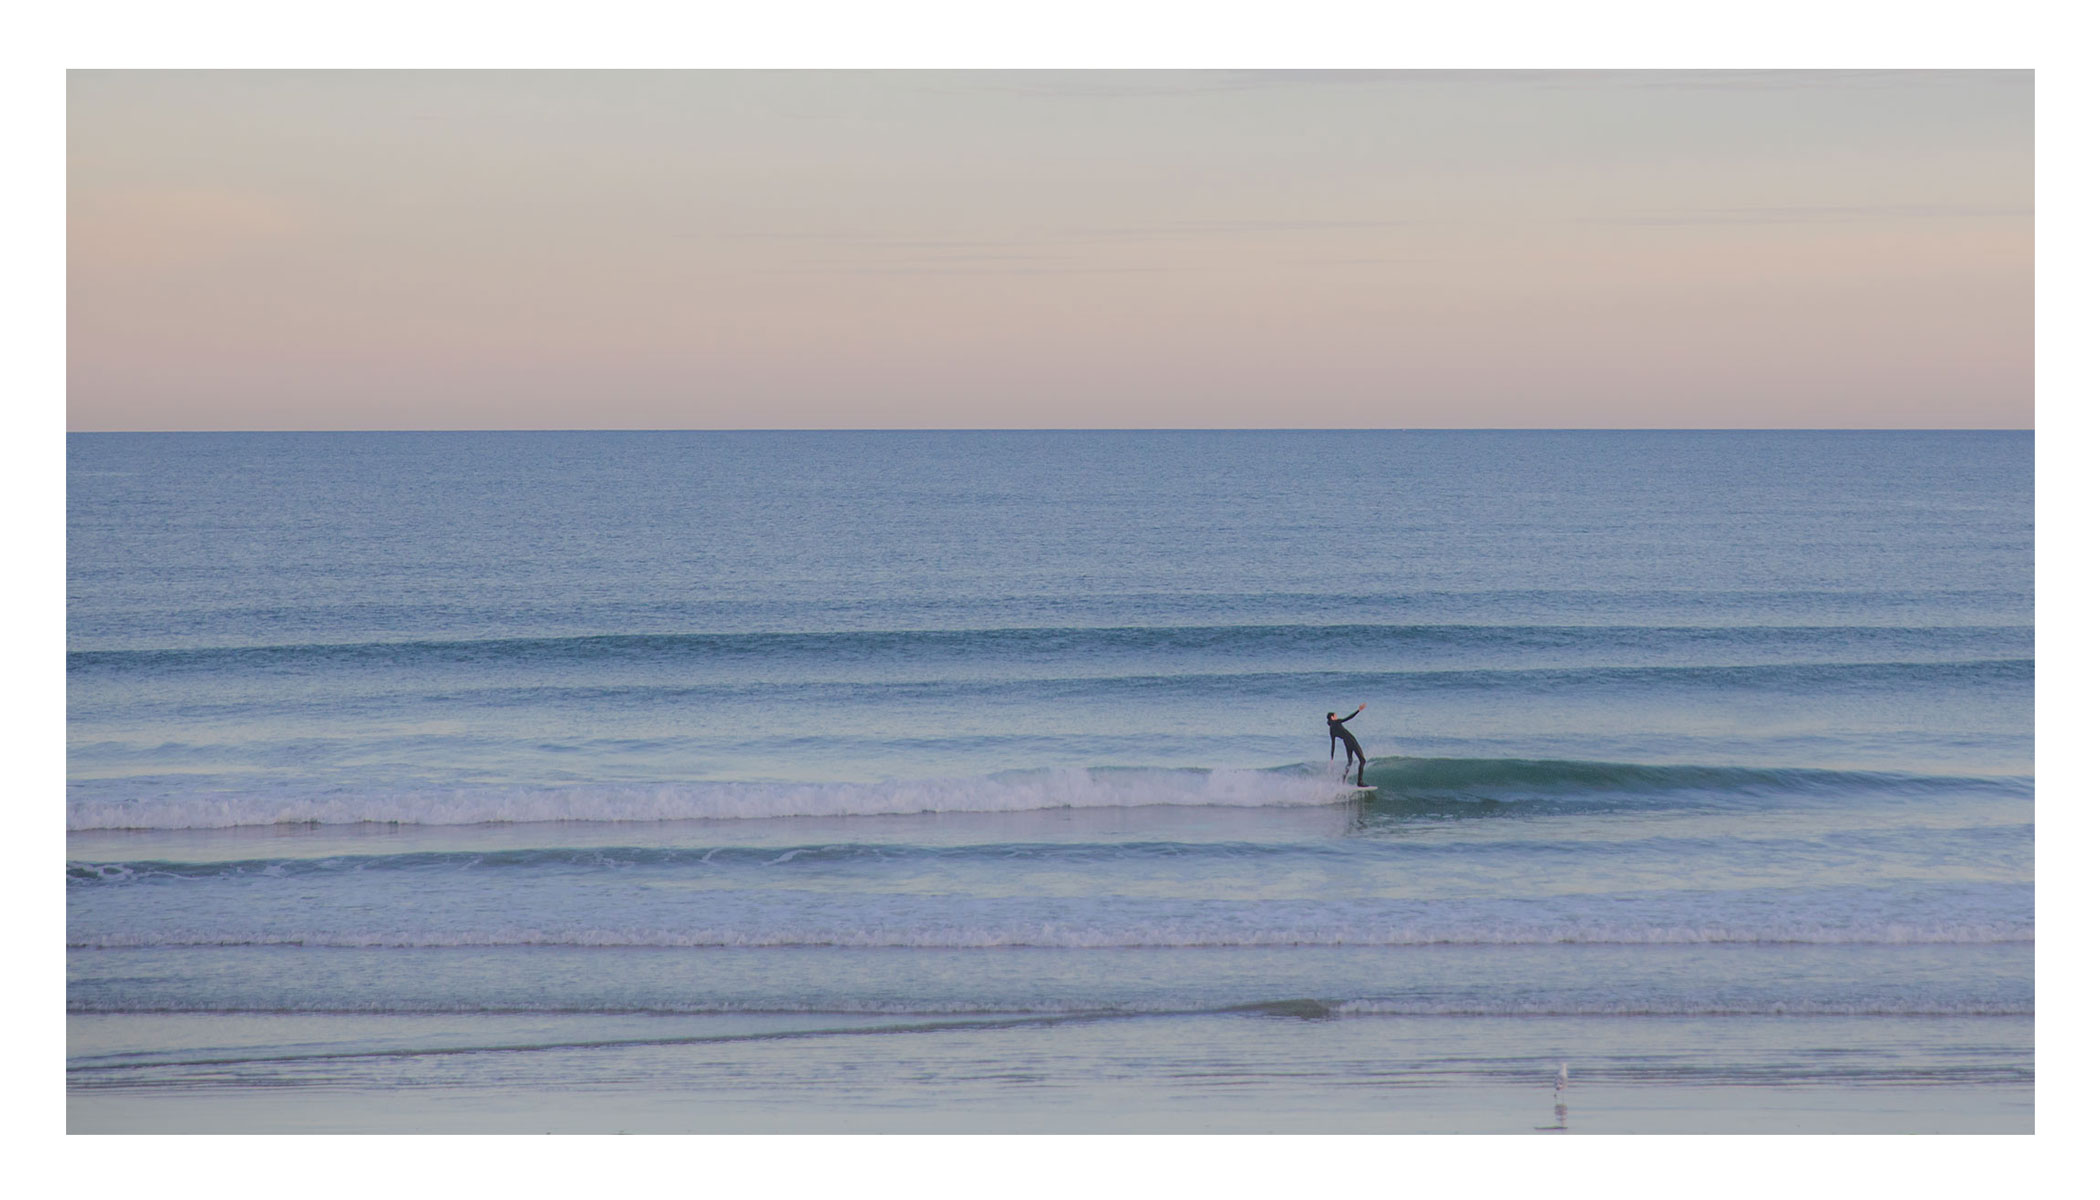 Photo of a single surfer riding a small wave with the sunrise in the background